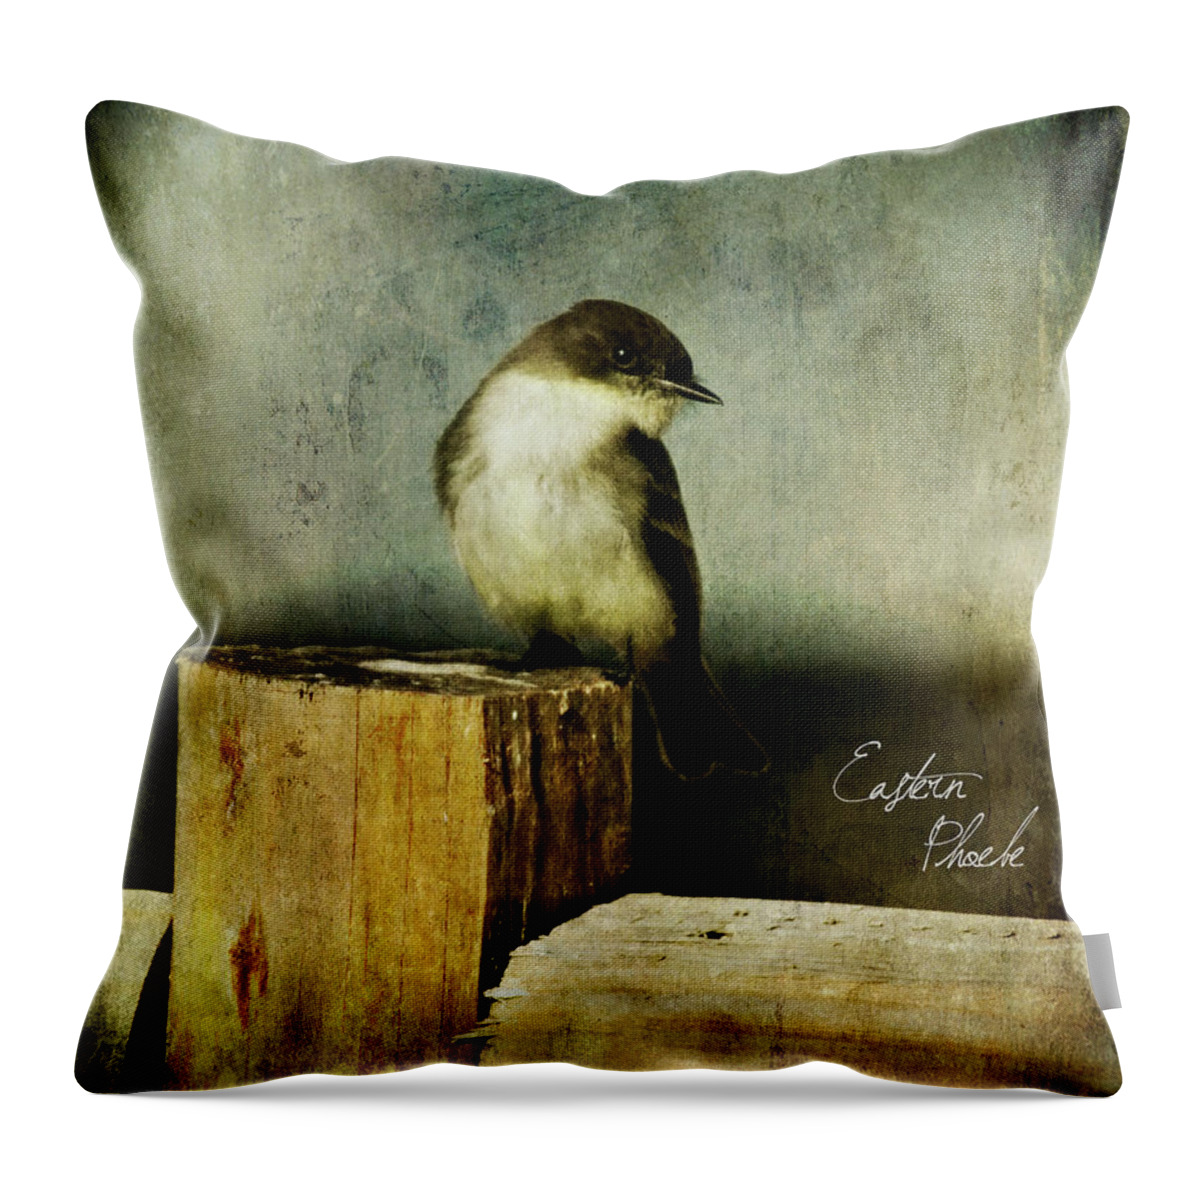 Bird Throw Pillow featuring the photograph Perched Phoebe by Lana Trussell